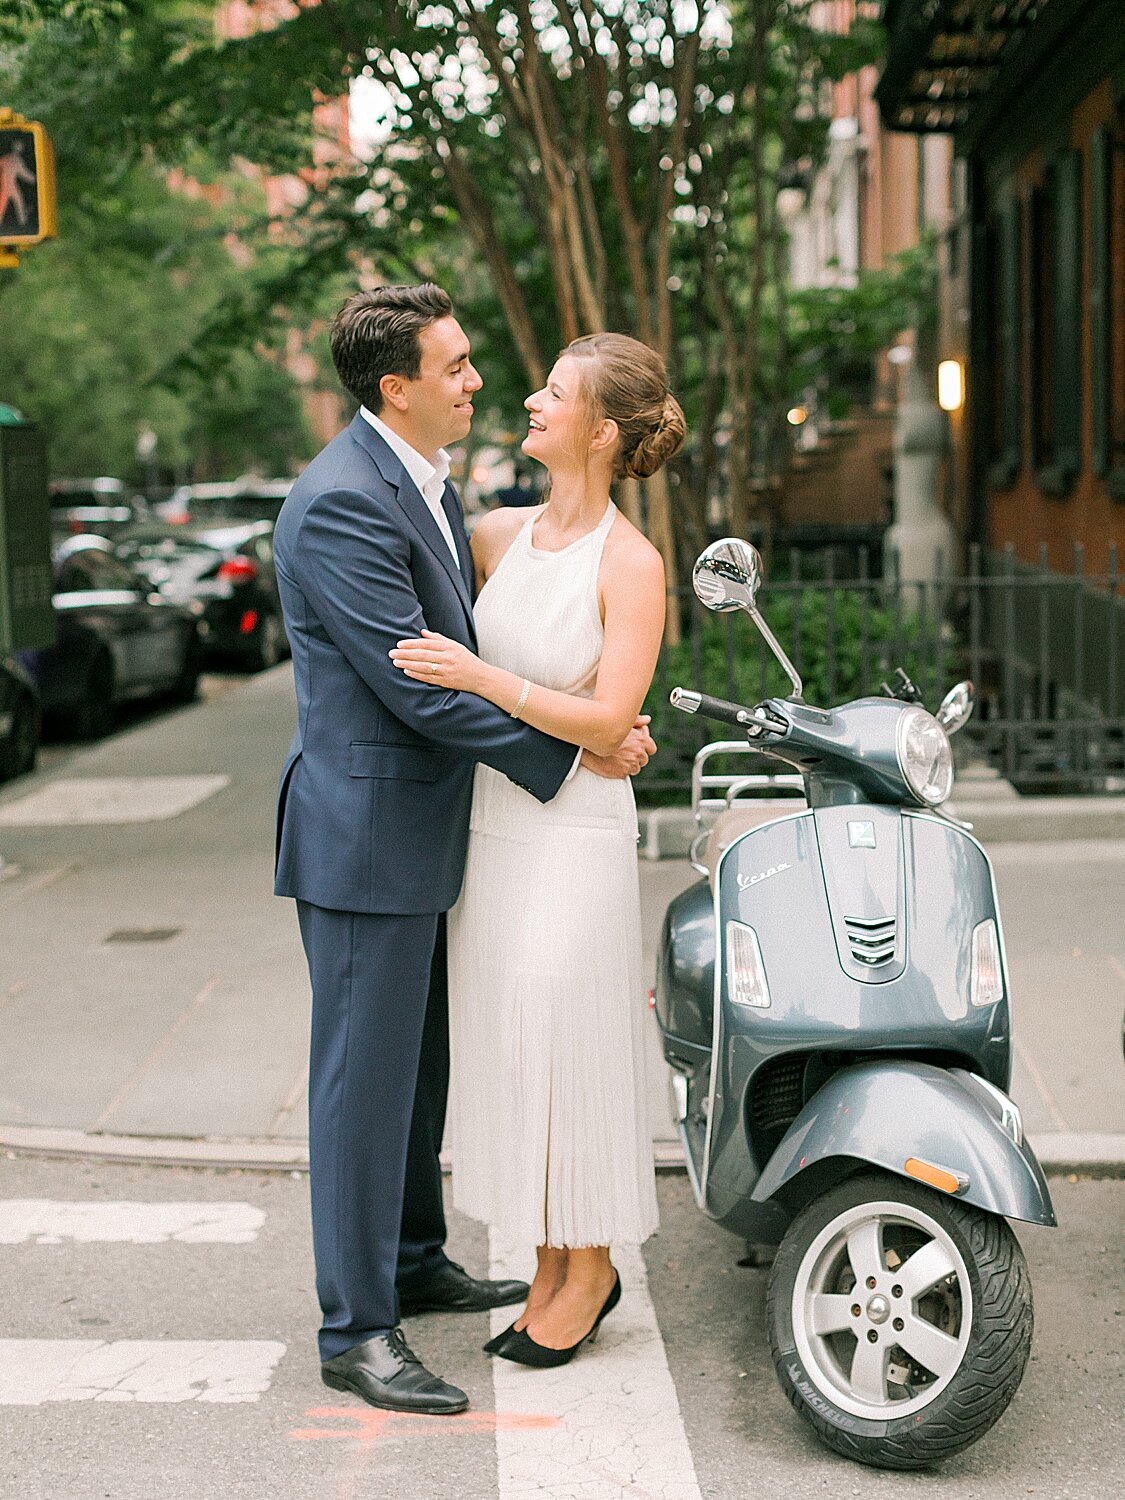 romantic engagement portraits by Vespa in NYC | Asher Gardner Photography | Gramercy Park Engagement Session